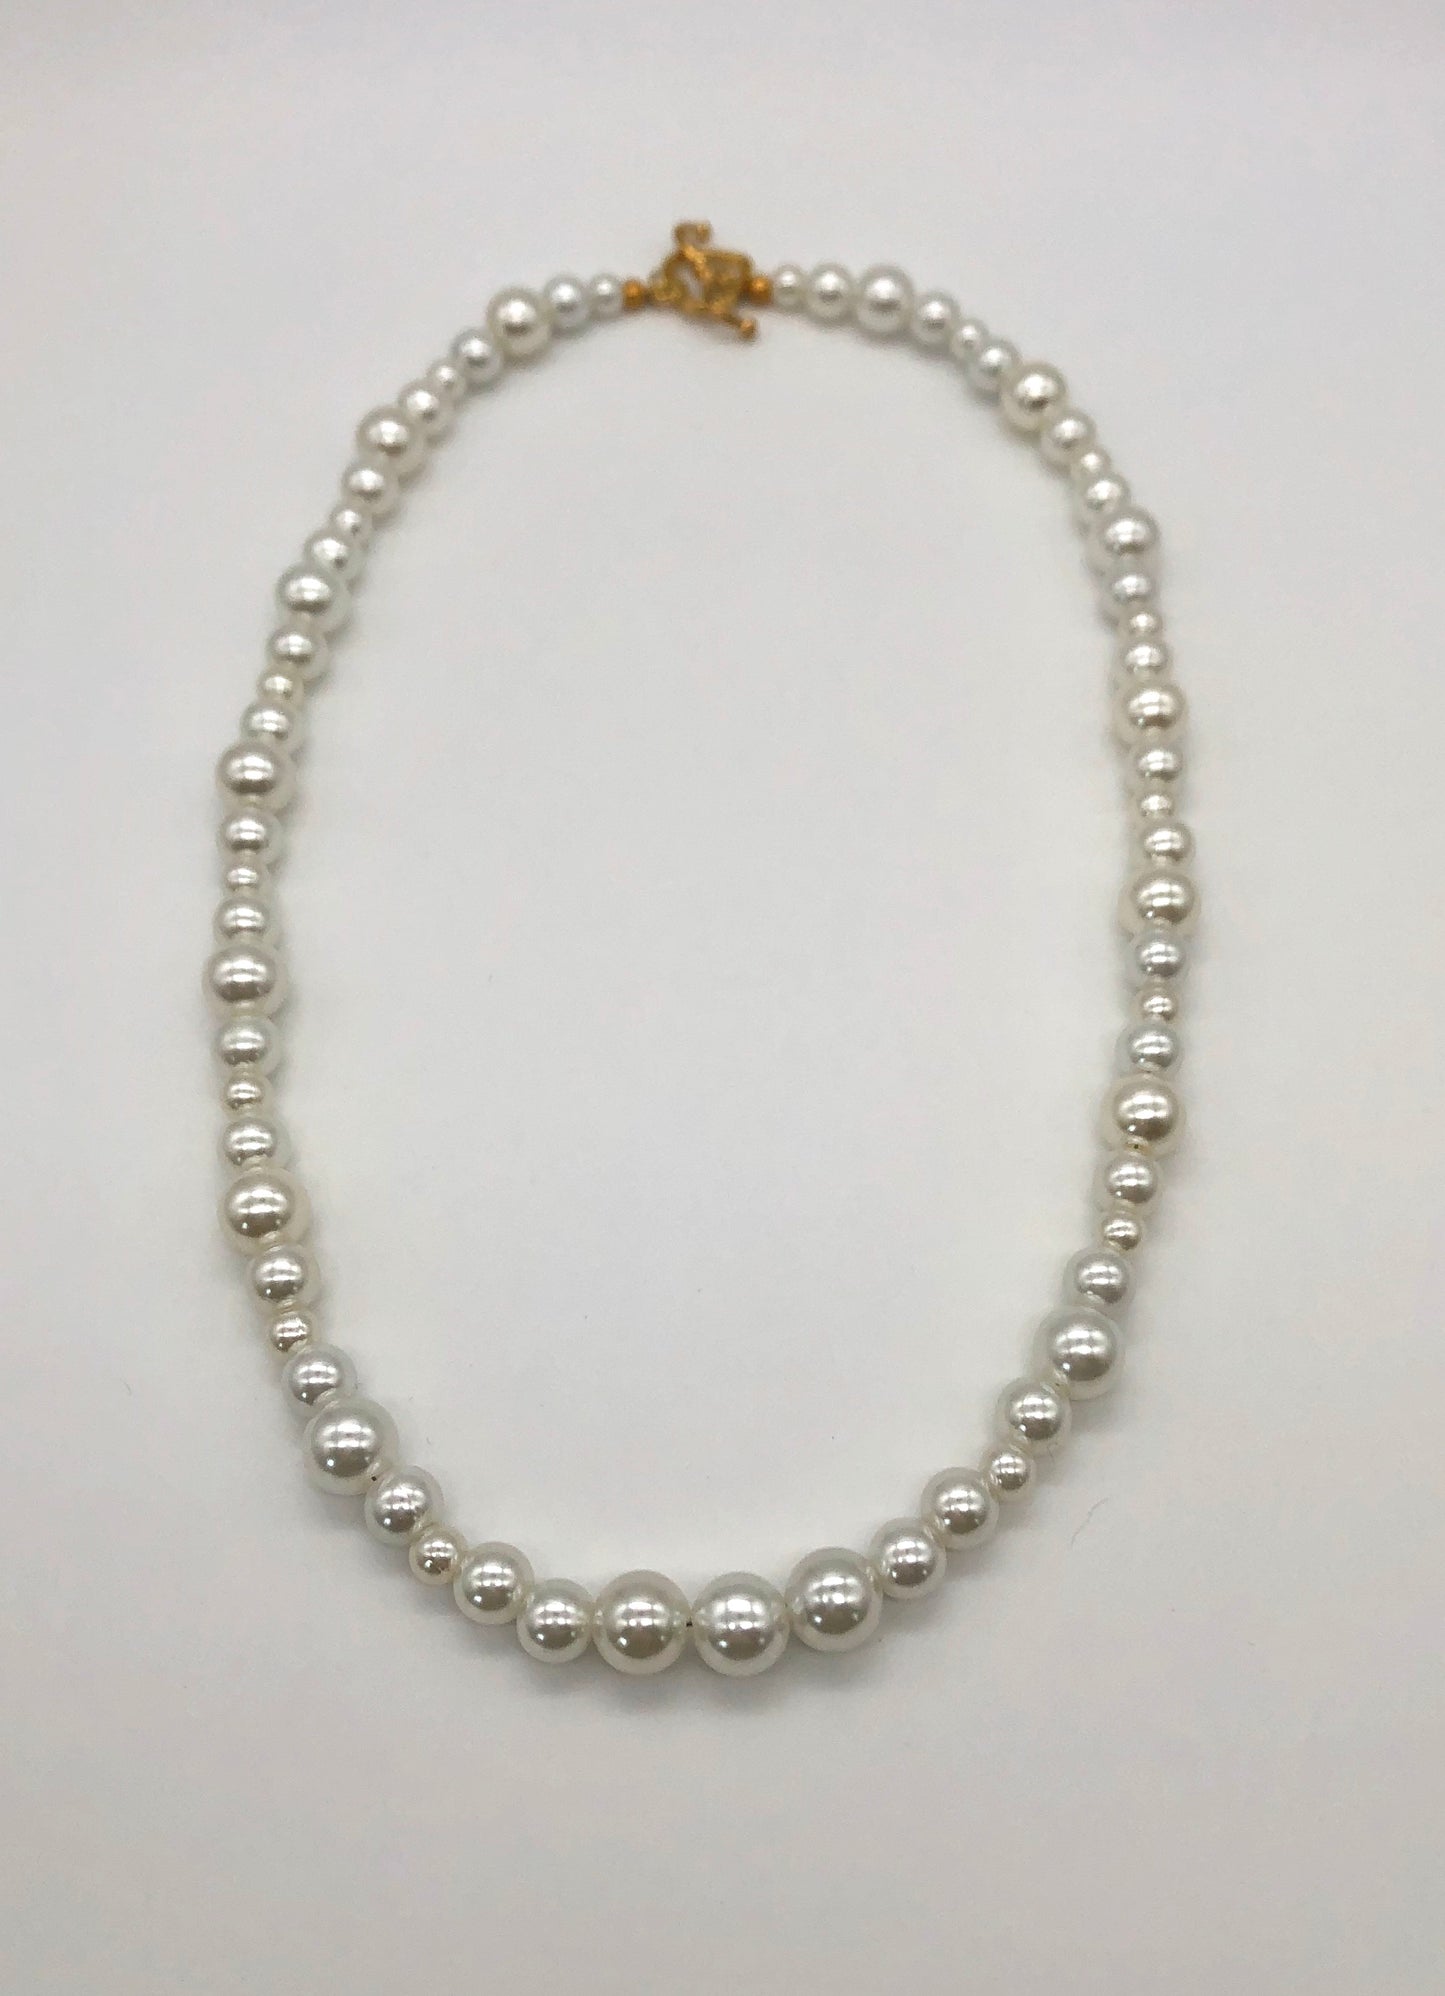 Faux pearl bead necklace with gold plated heart toggle clasp